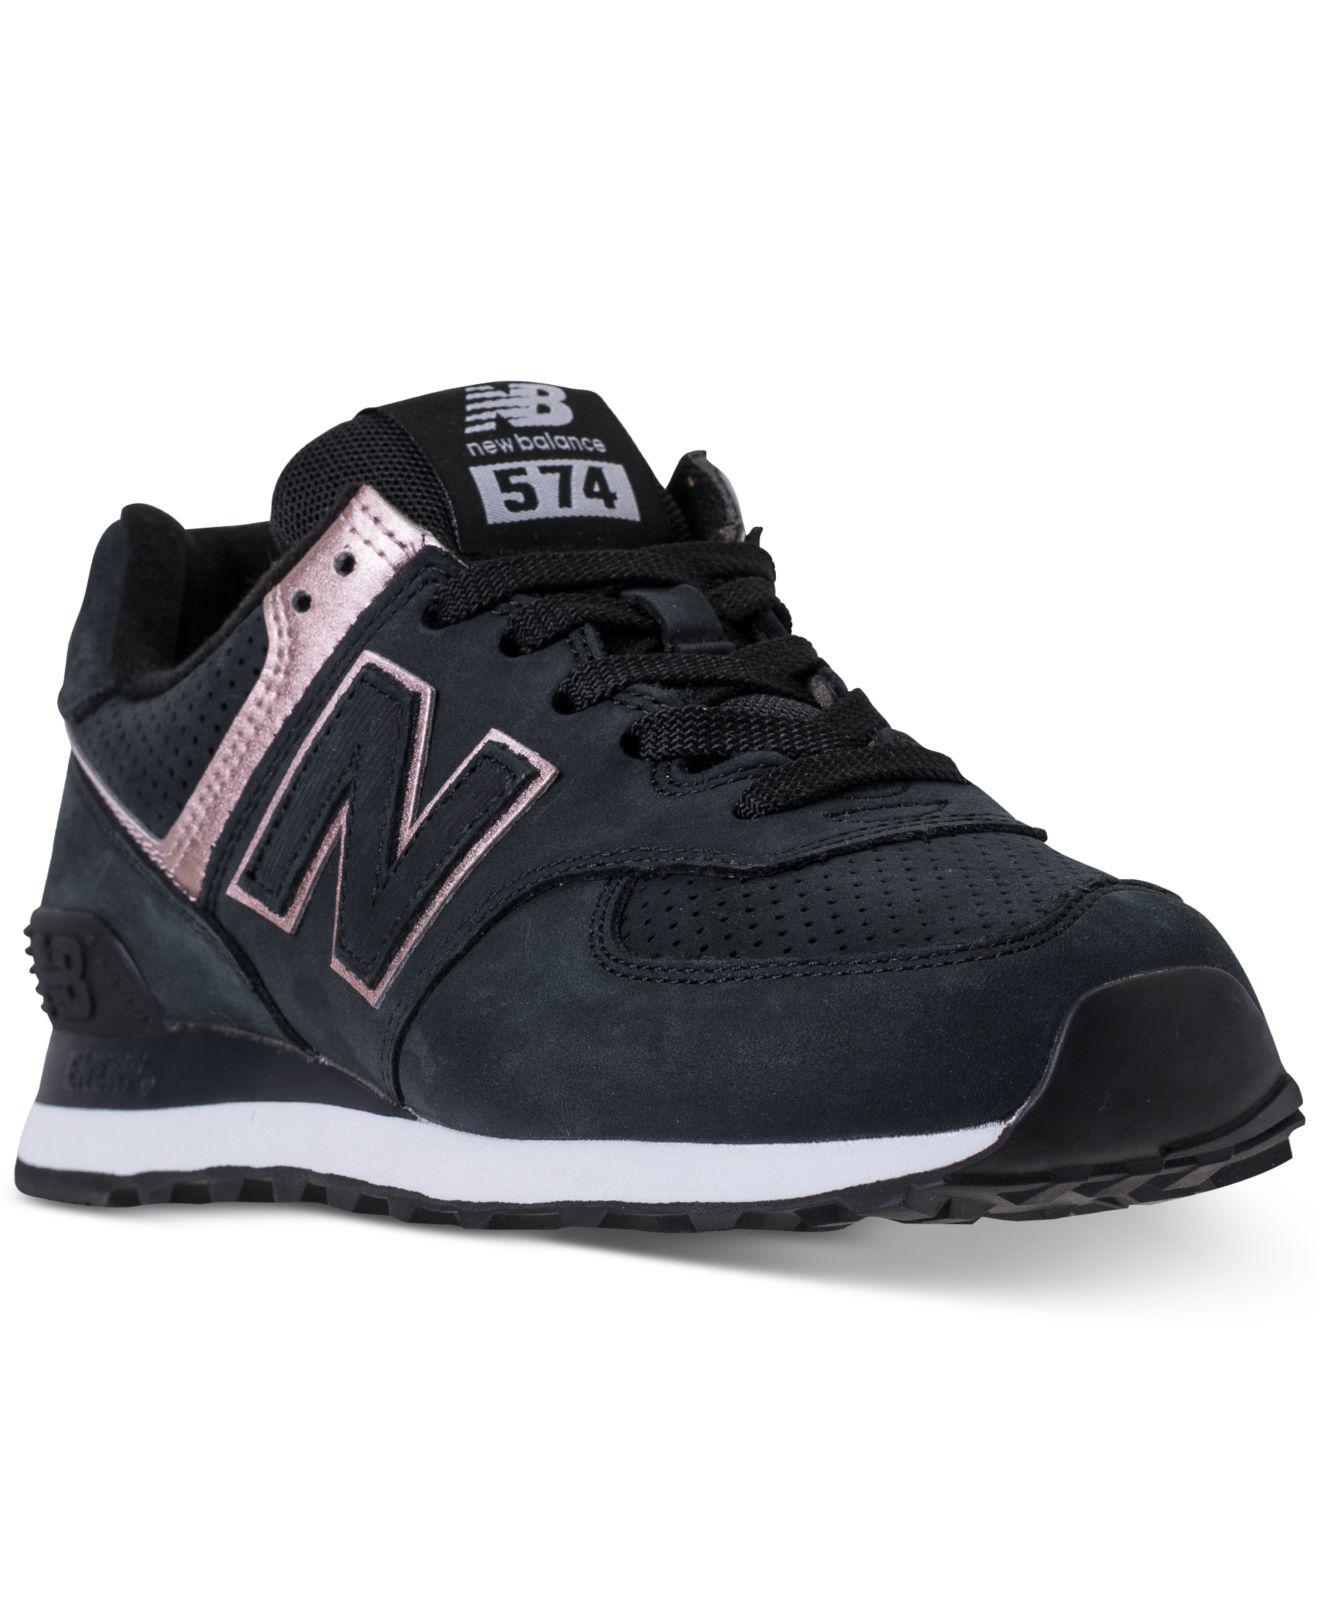 New Balance Suede 574 Rose Gold Casual Sneakers From Finish Line in Black -  Lyst